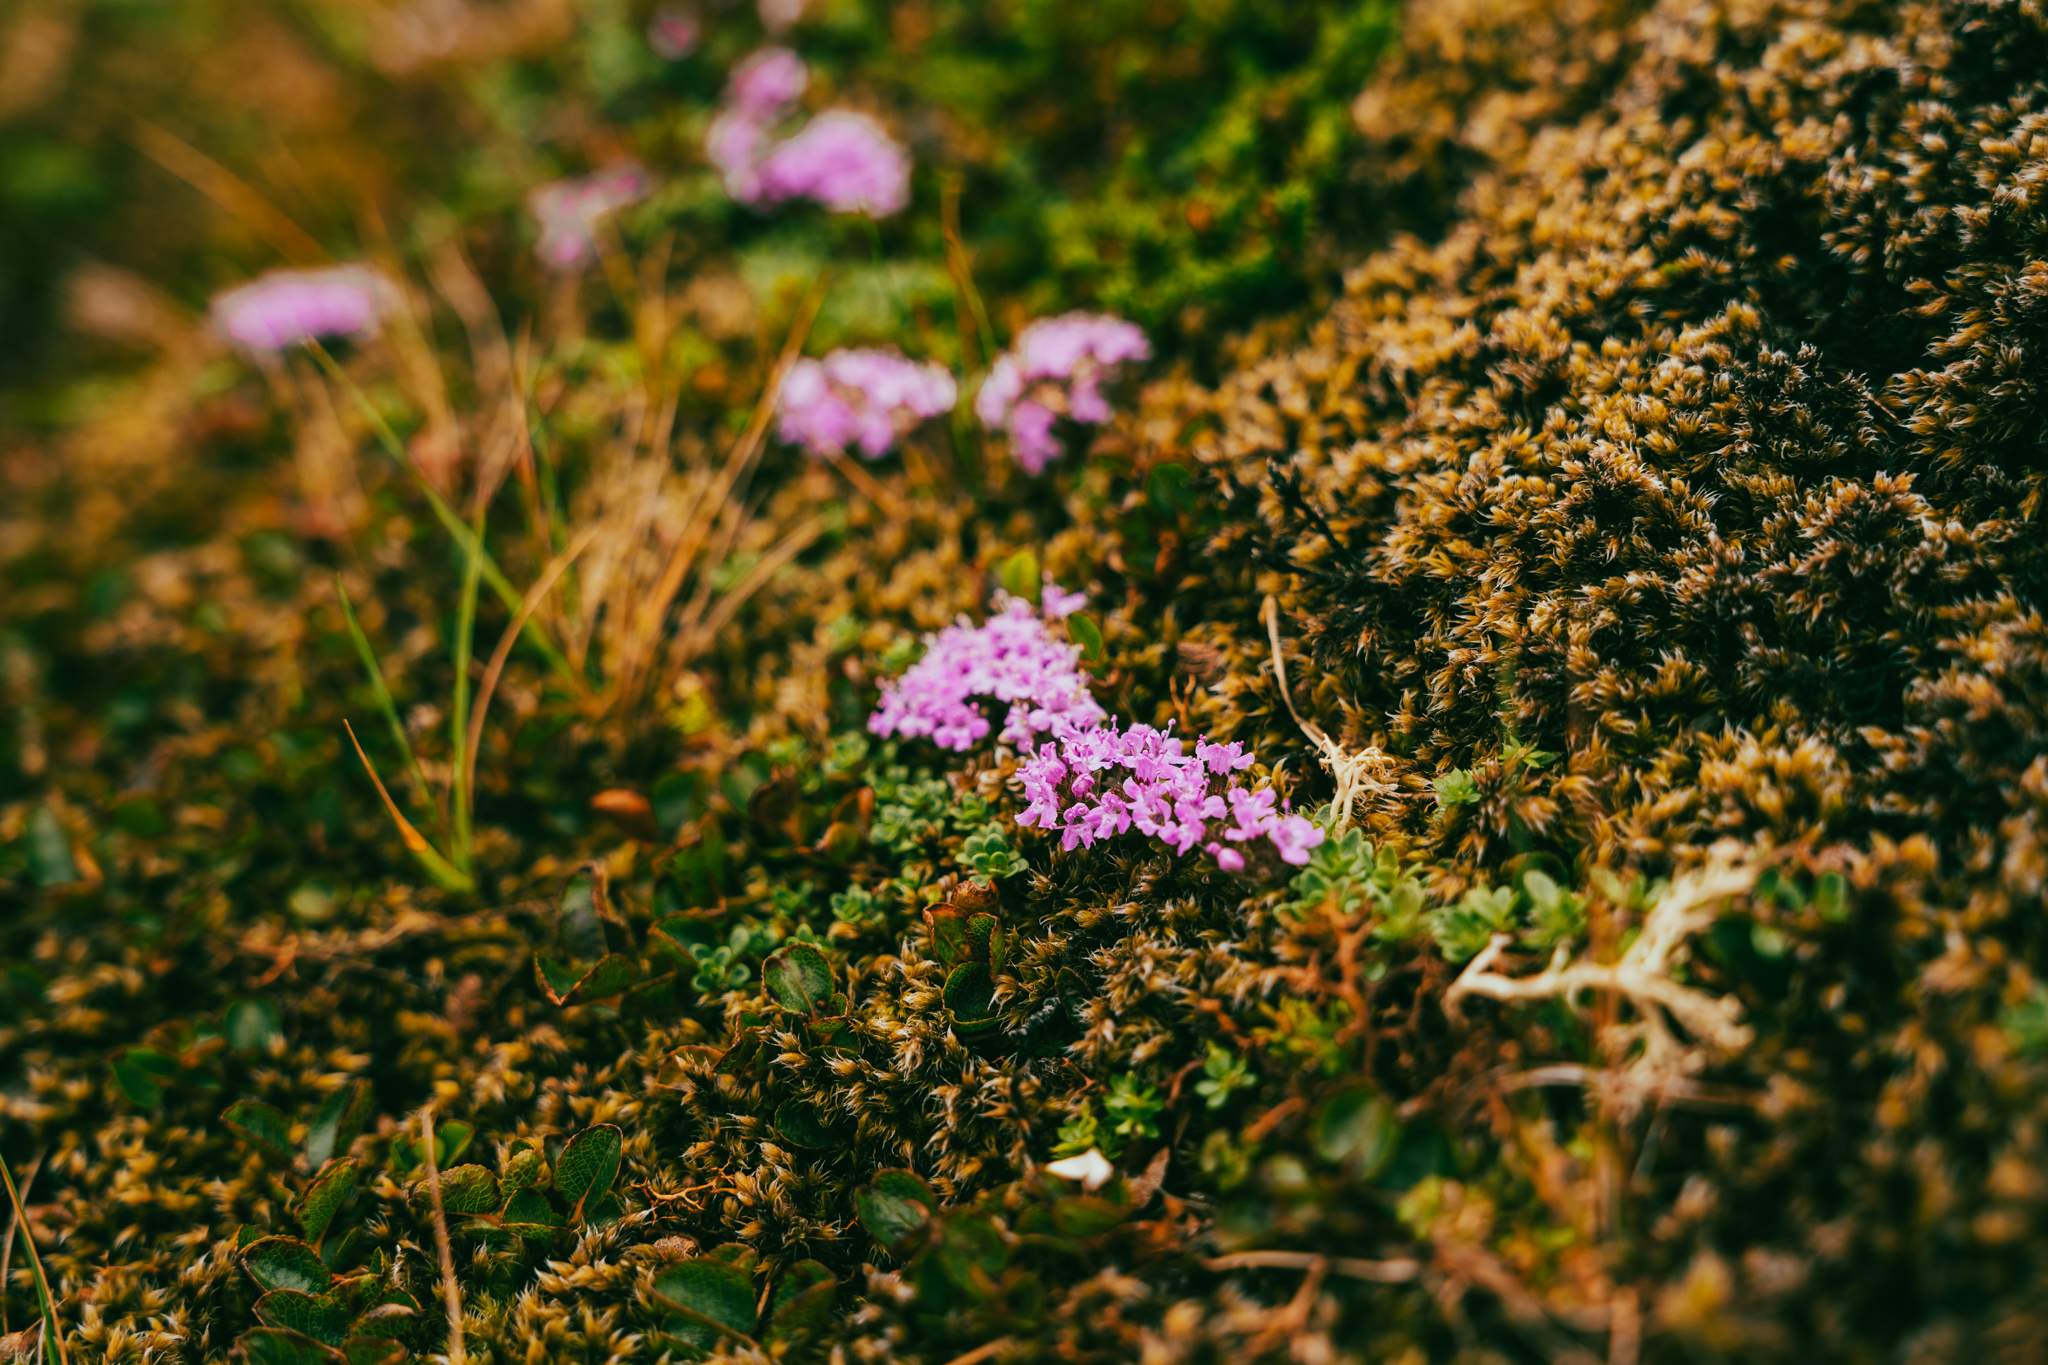 Tiny, beautiful plants covering the ground